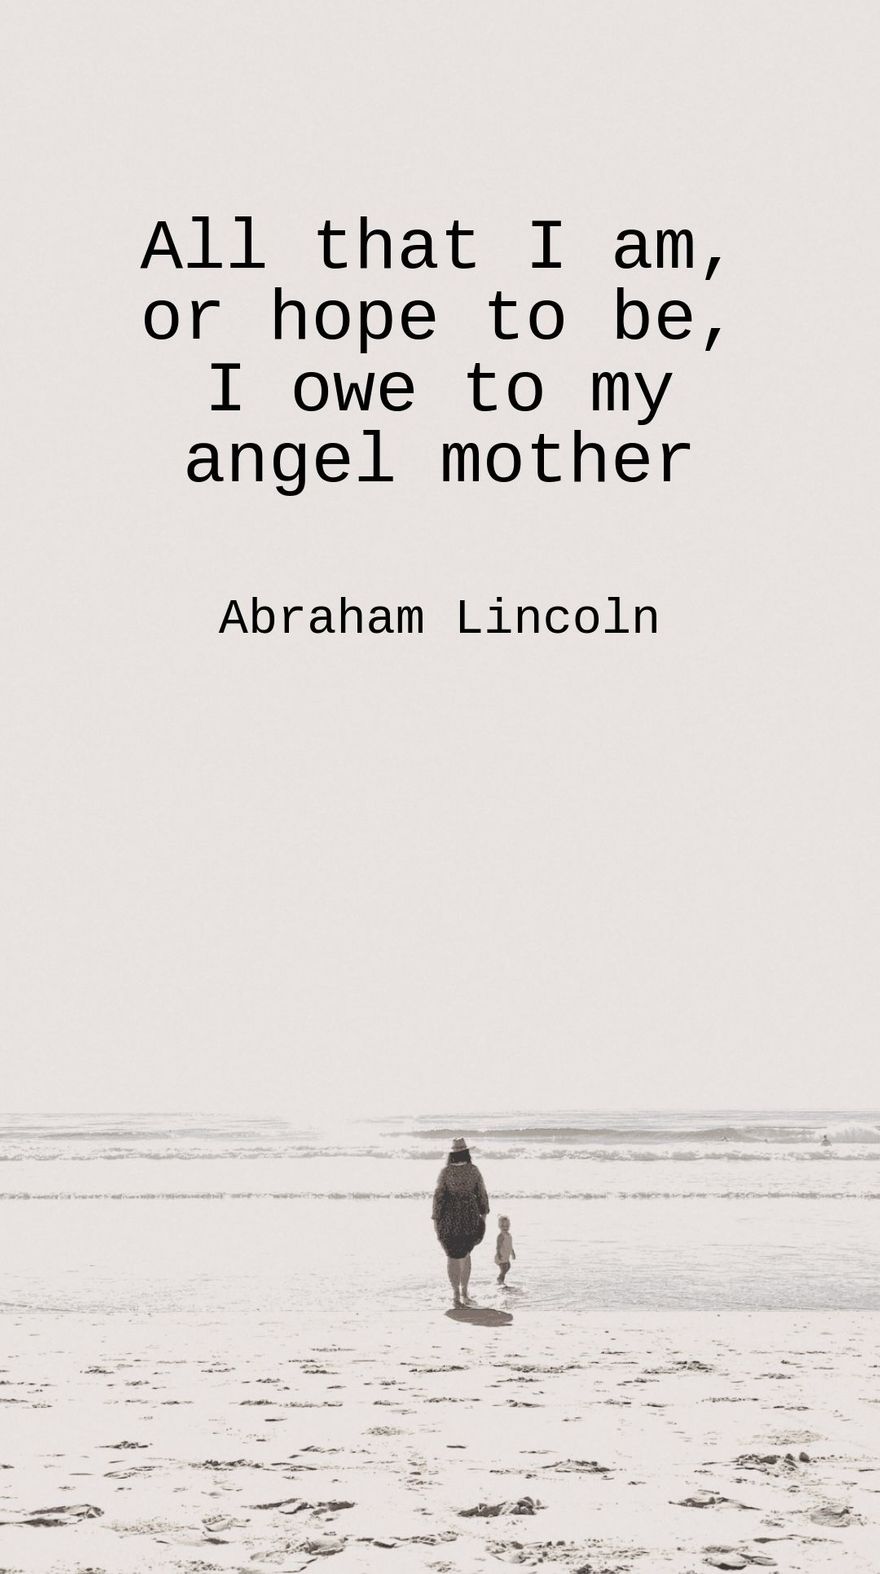 Free Abraham Lincoln - All that I am, or hope to be, I owe to my angel mother. 